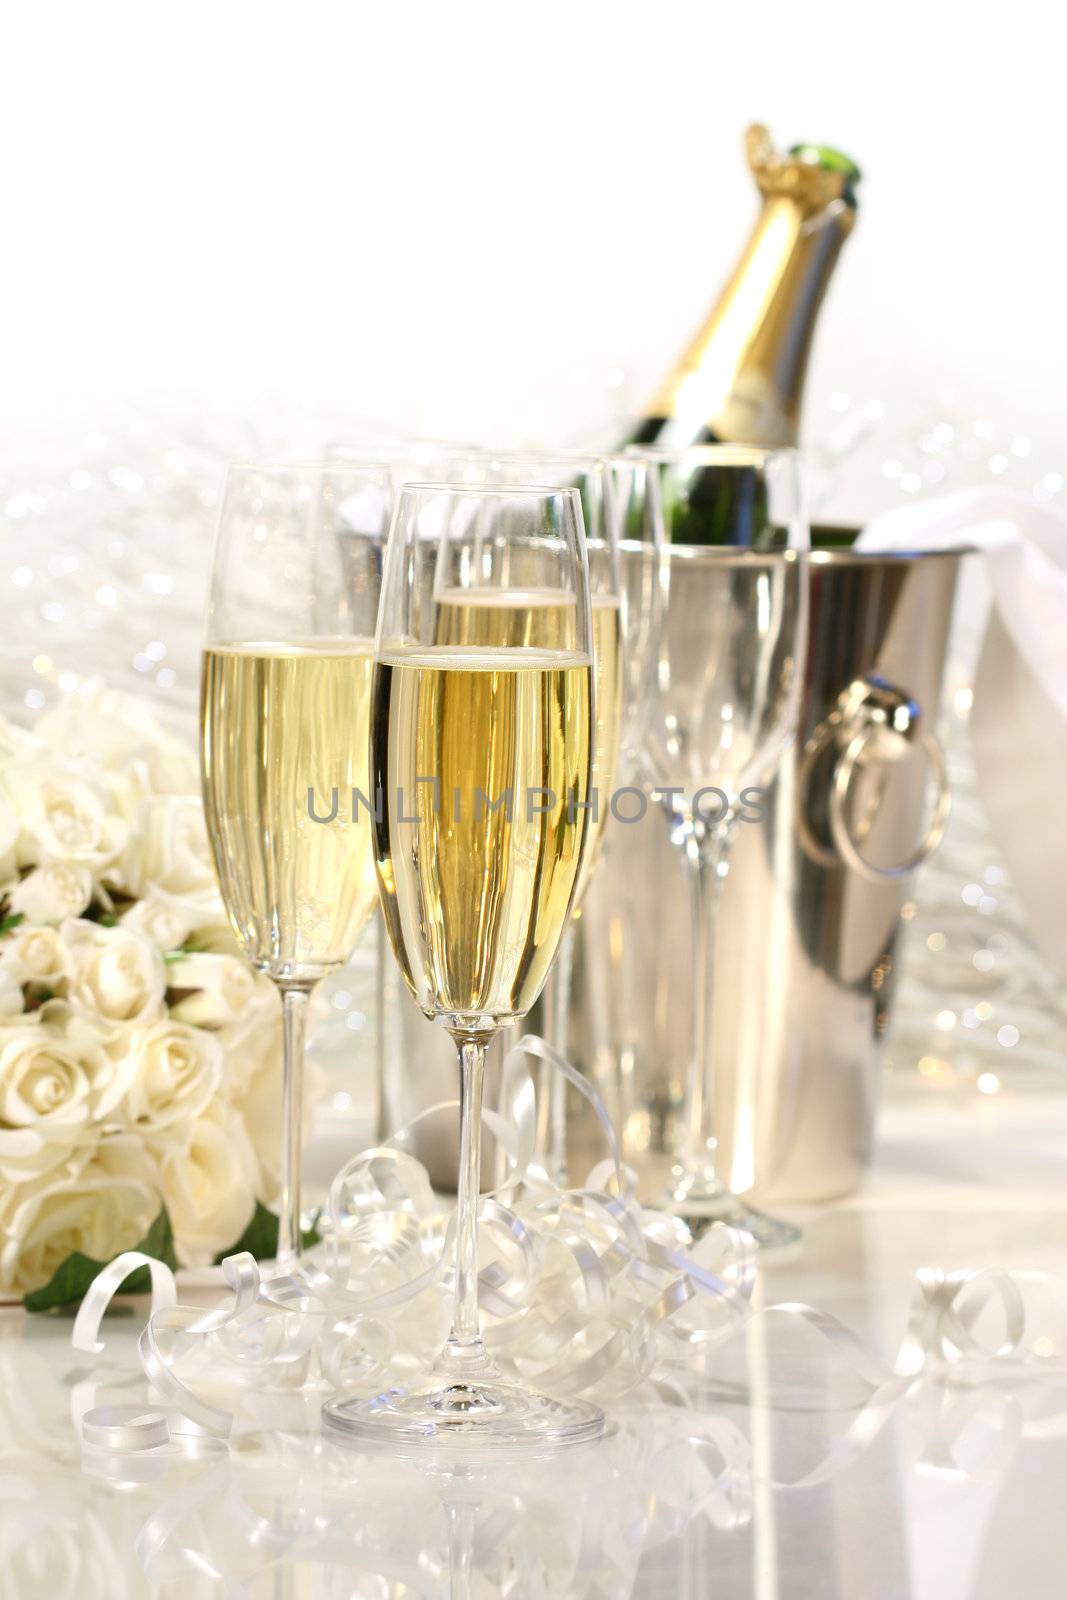 Glasses of champagne, roses, and a bottle of champagne